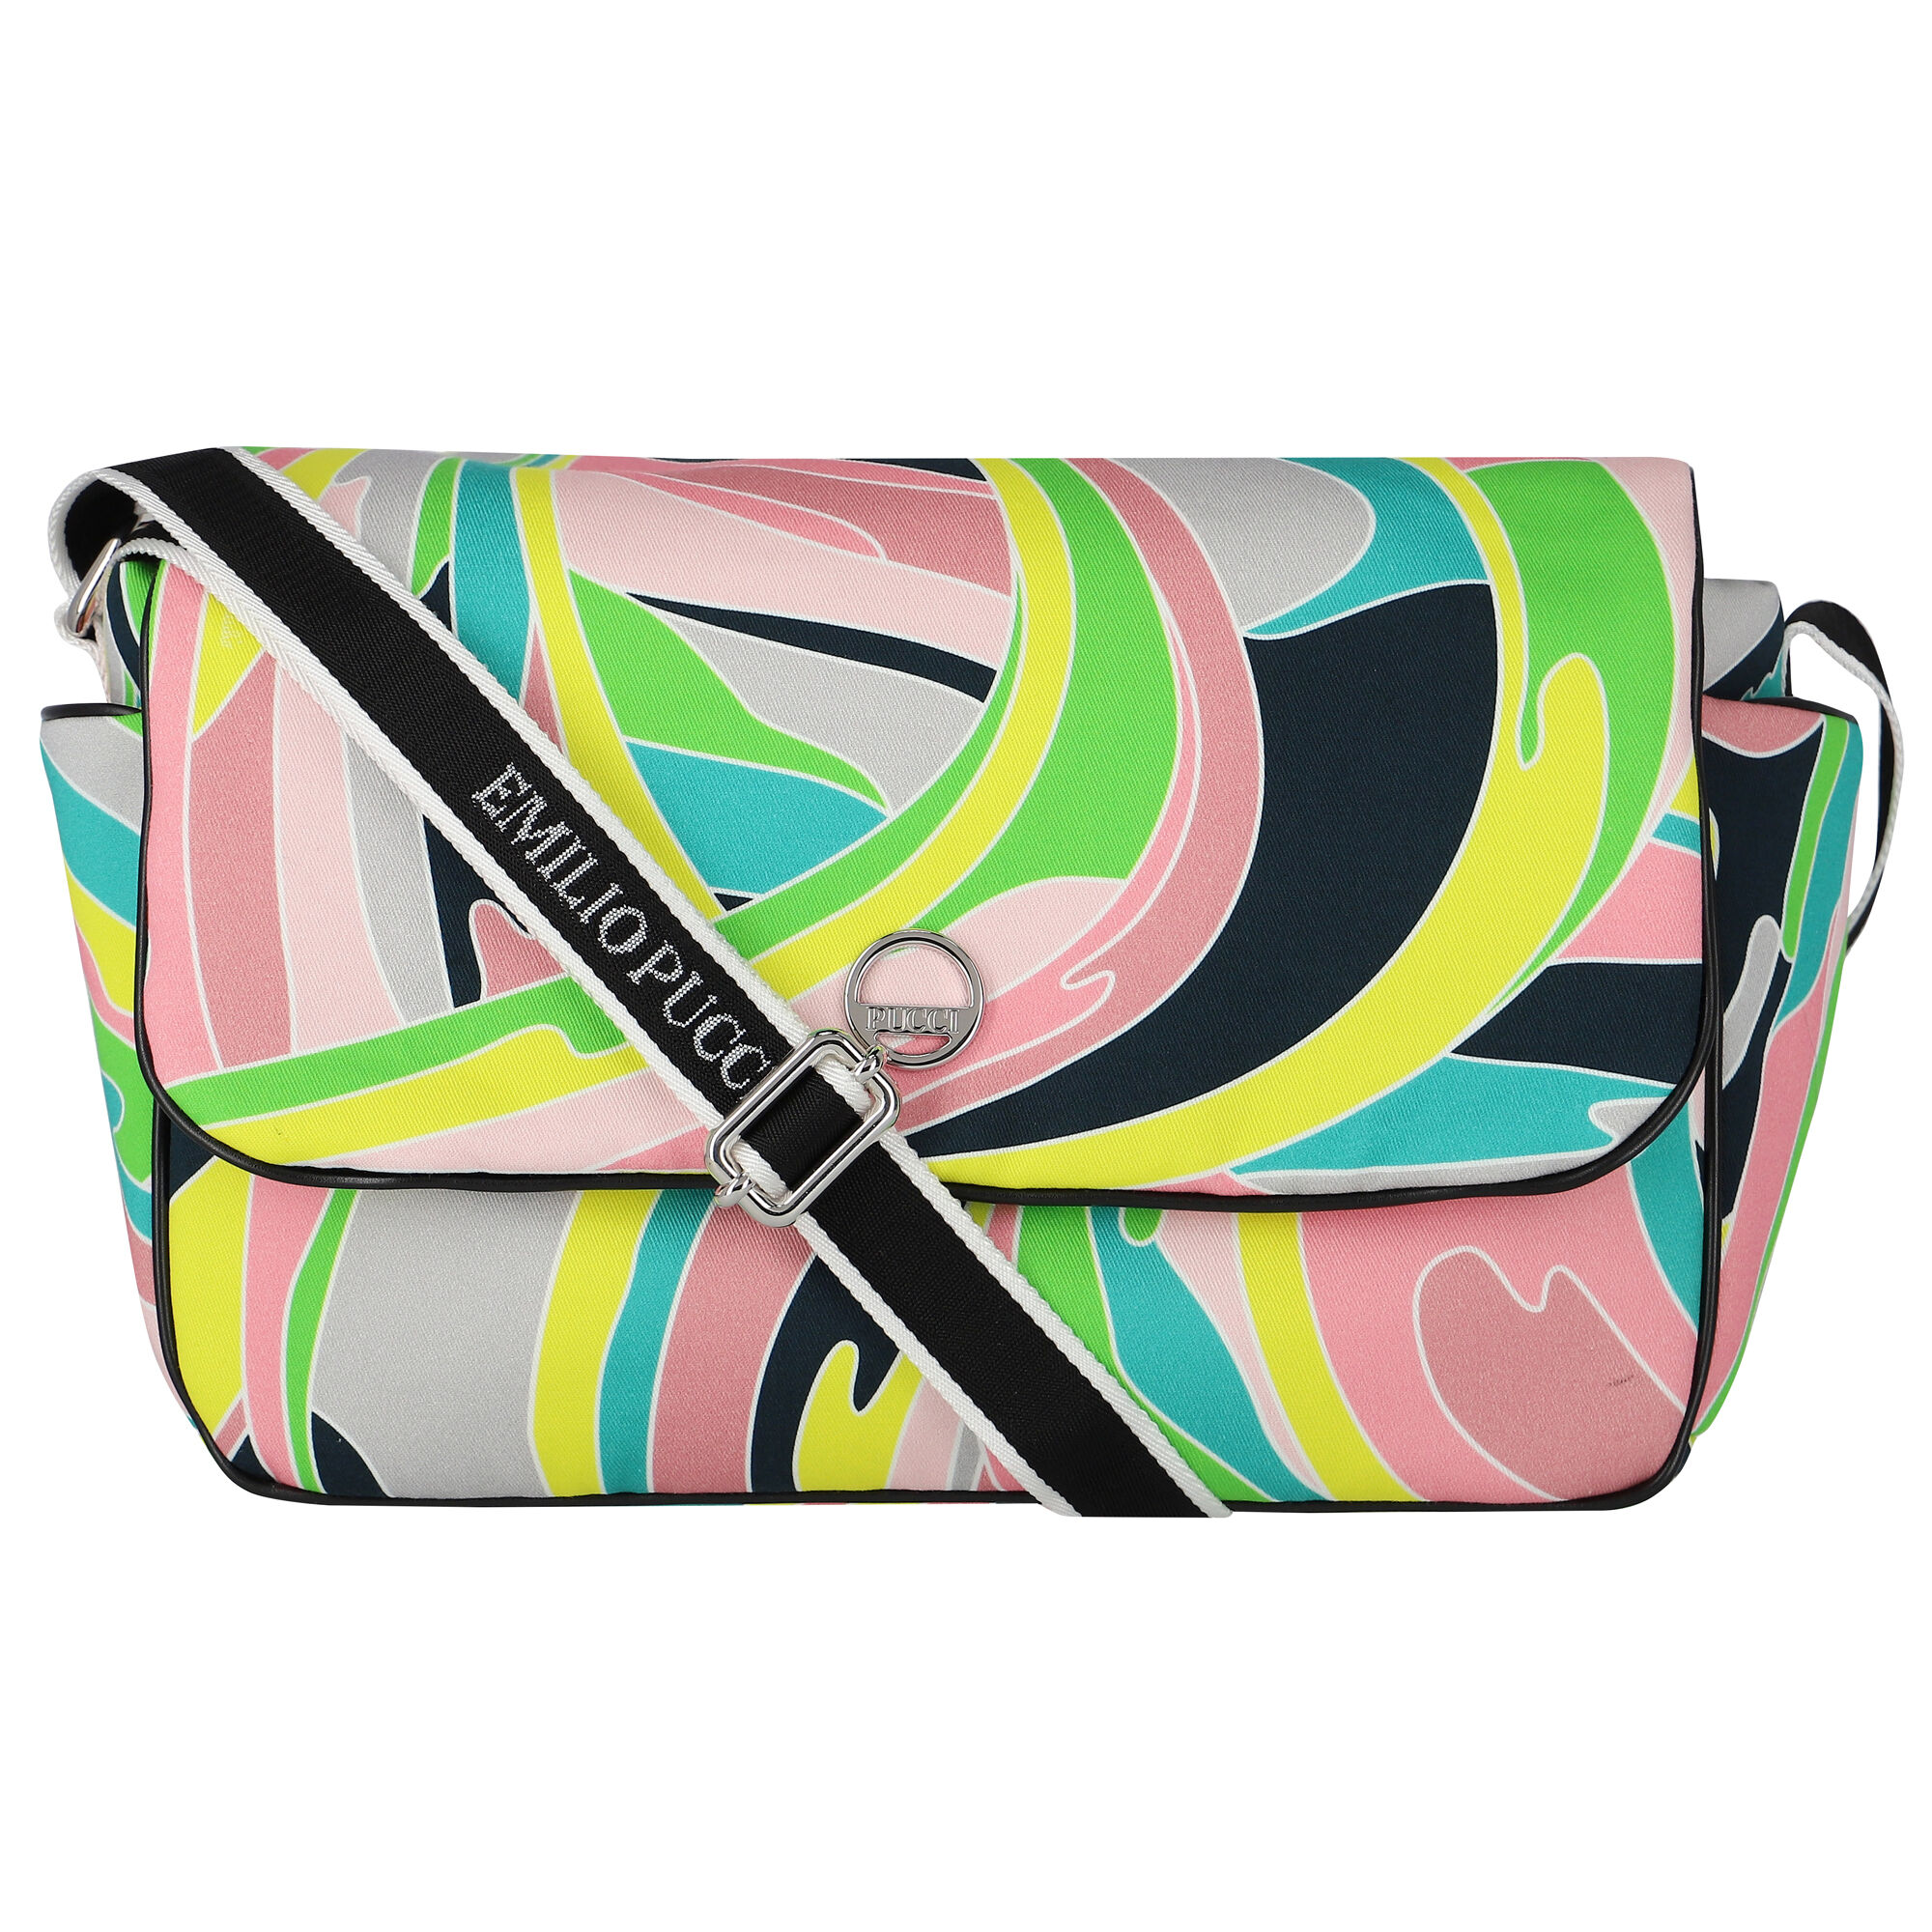 Emilio Pucci Baby Girls Multi-Colored Changing Bag | Junior Couture USA